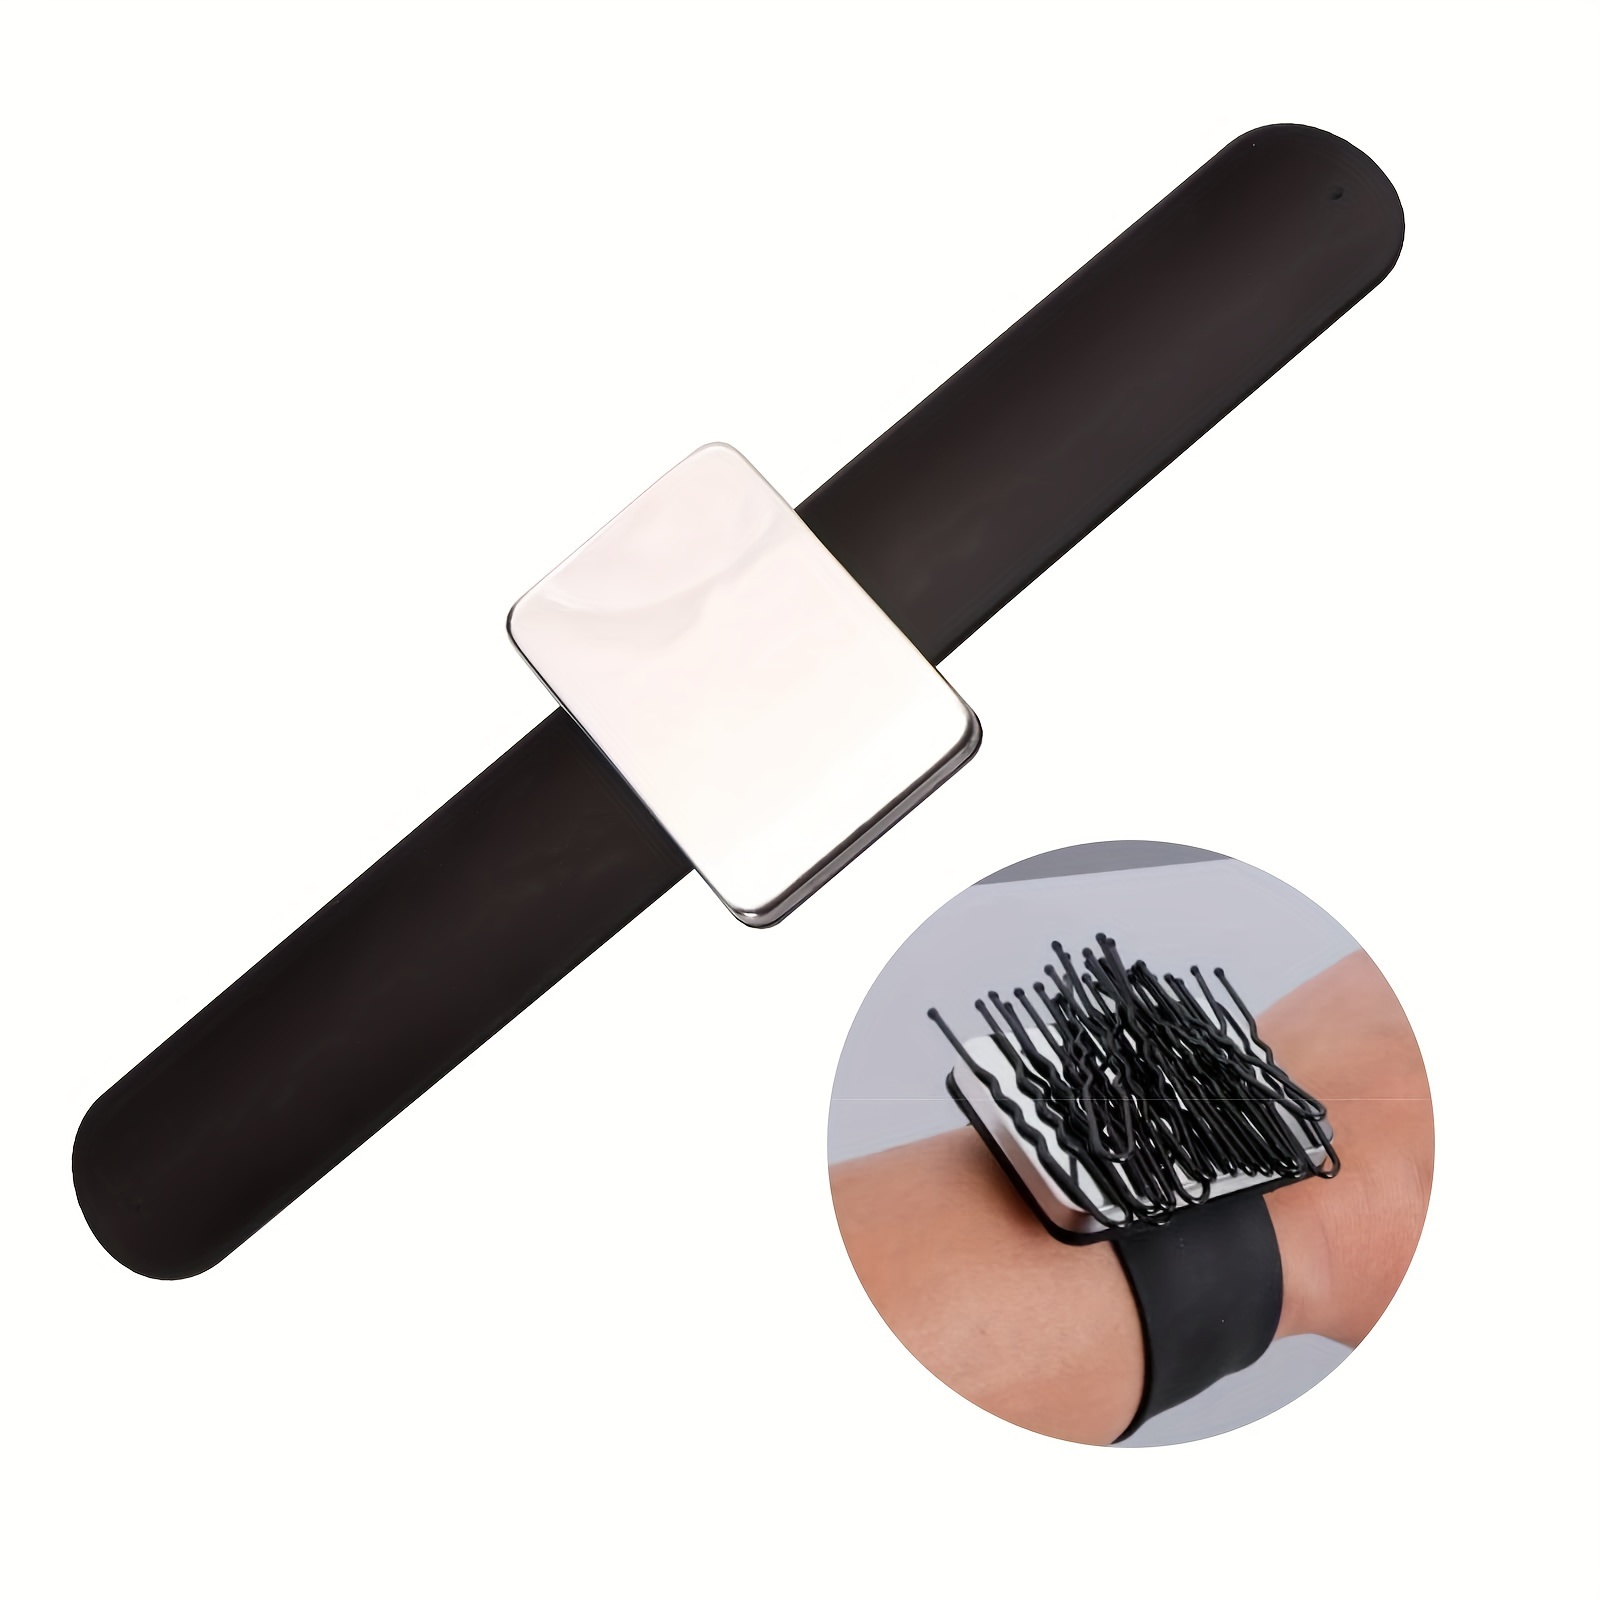  KOSDFOGE Magnetic Wristband, Hair Parting Ring Wristband,  Bracelet for Pins, Silicone Wrist Strap Bracelet Gel Wrist Band for  Braiding Hair : Beauty & Personal Care